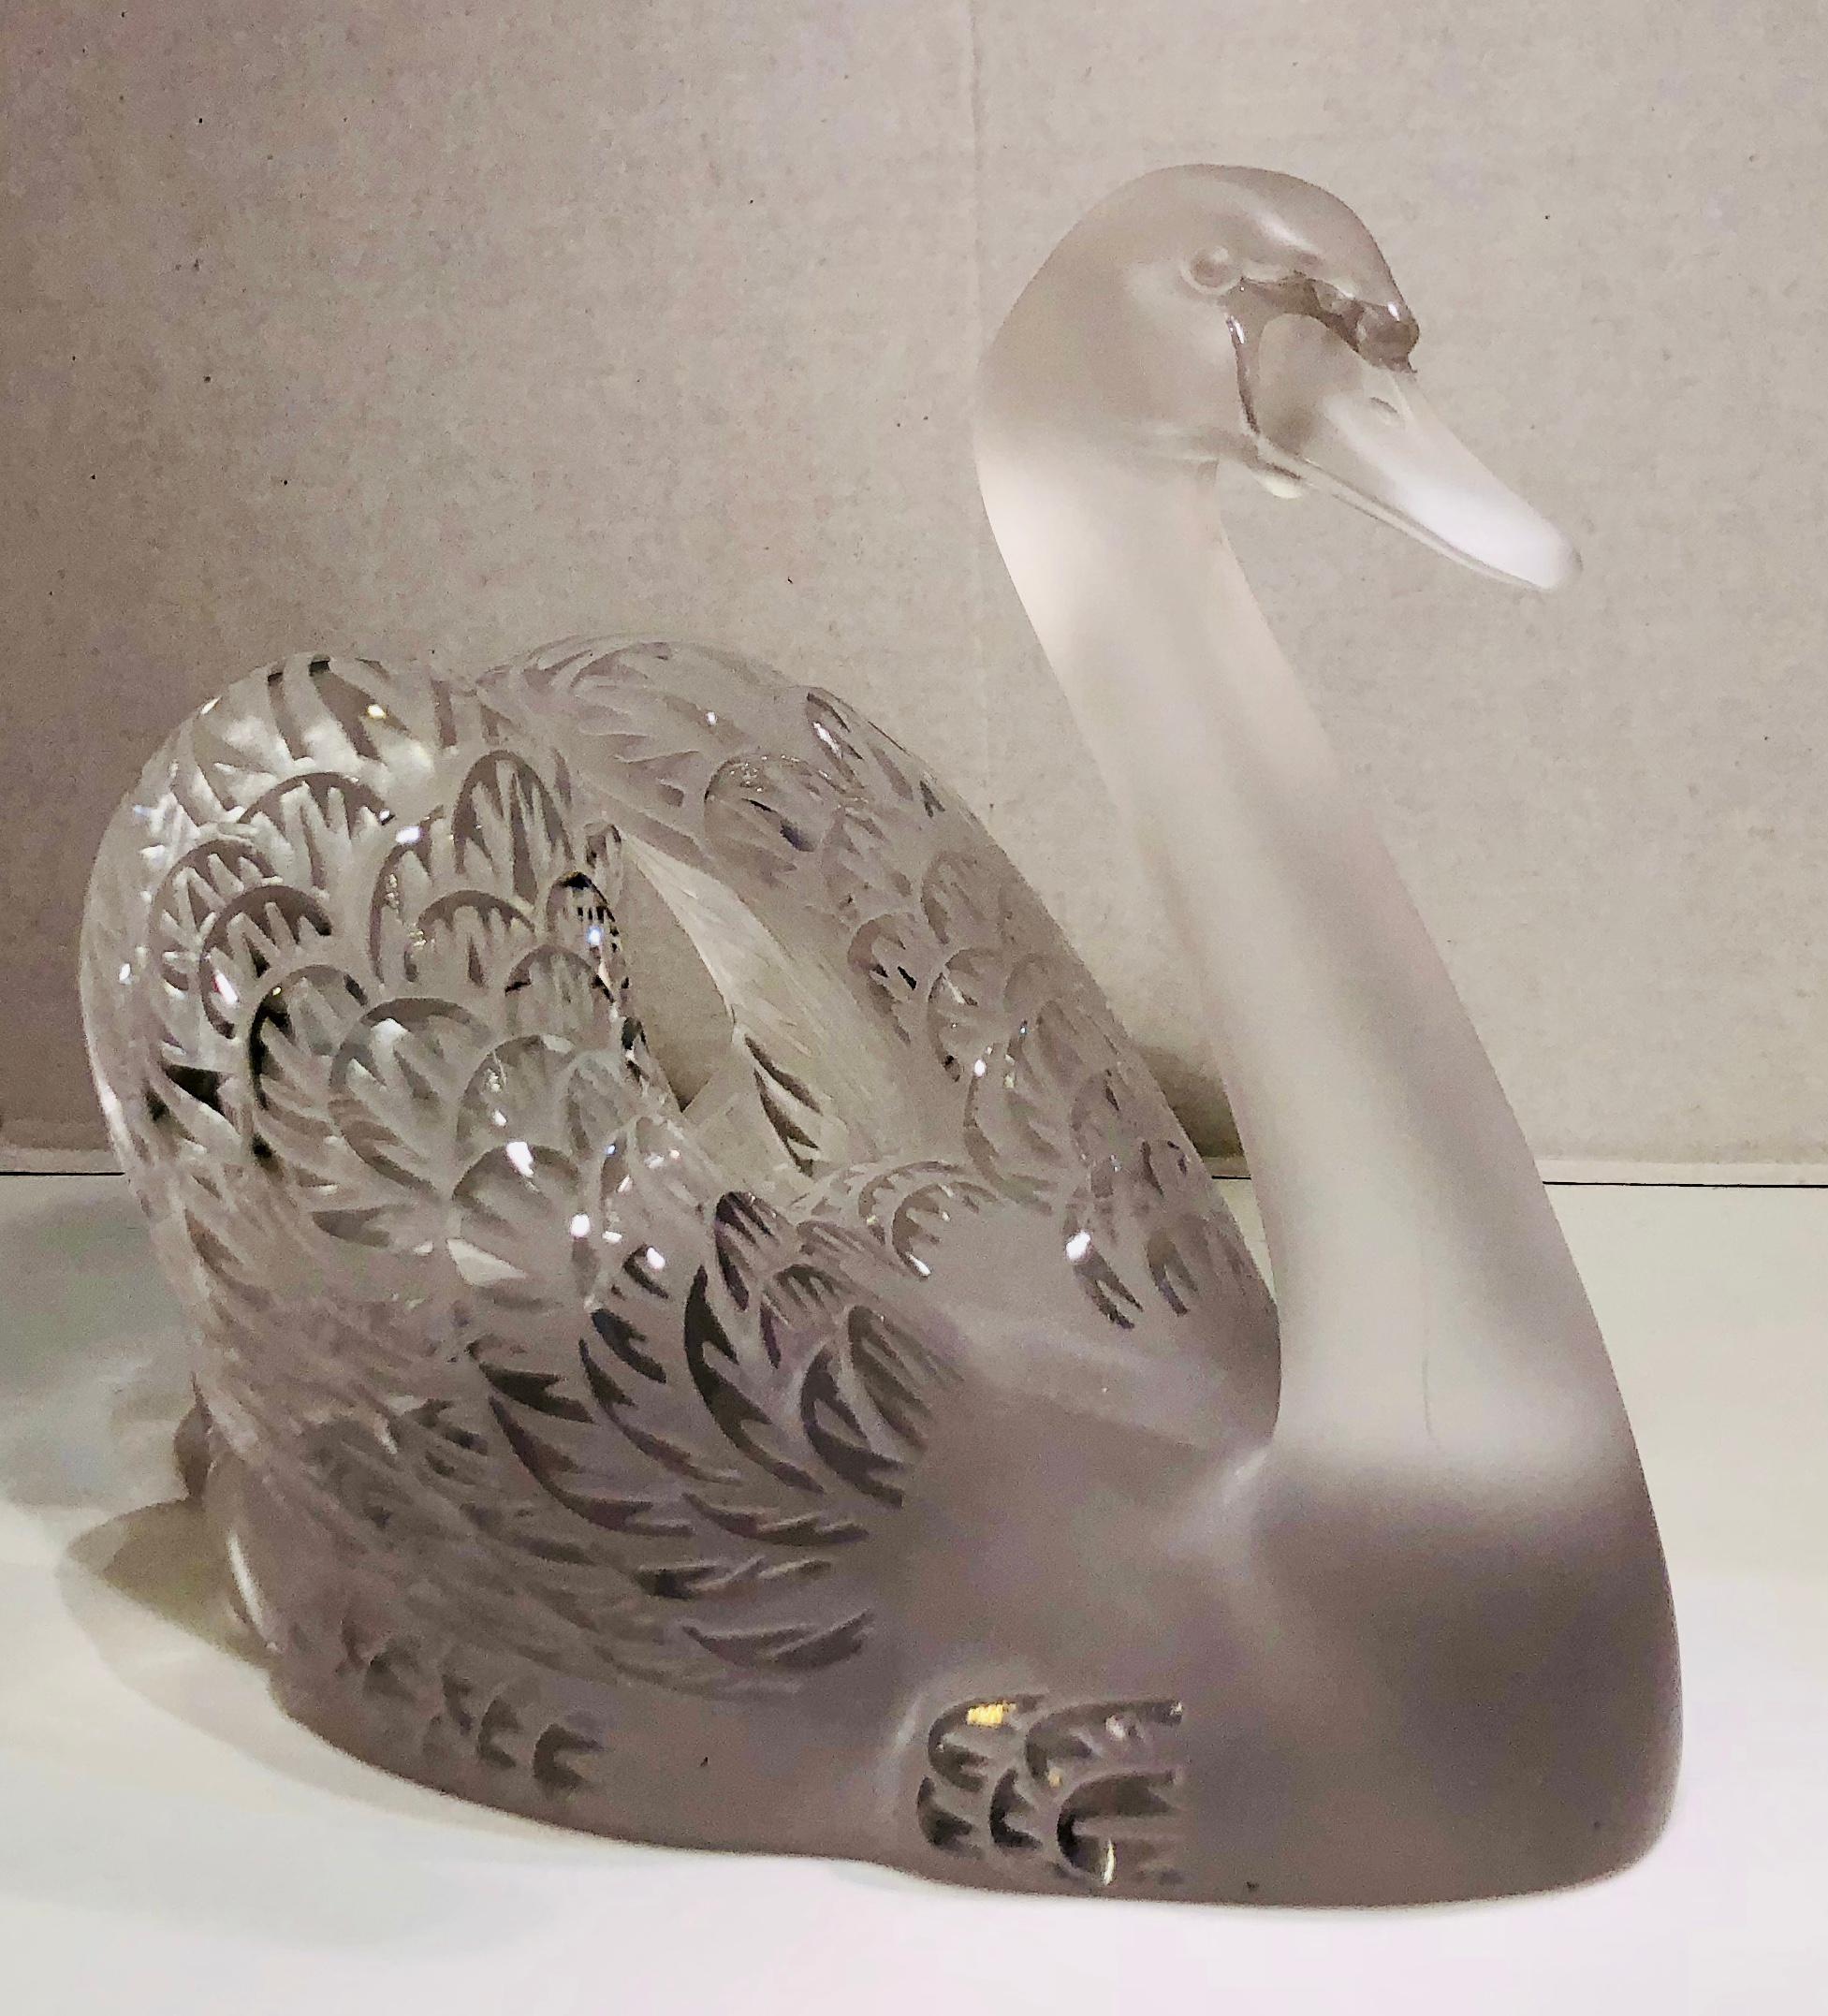 Iconic Large Lalique France 'Swan Head Up' Crystal Sculpture In Excellent Condition For Sale In Tustin, CA